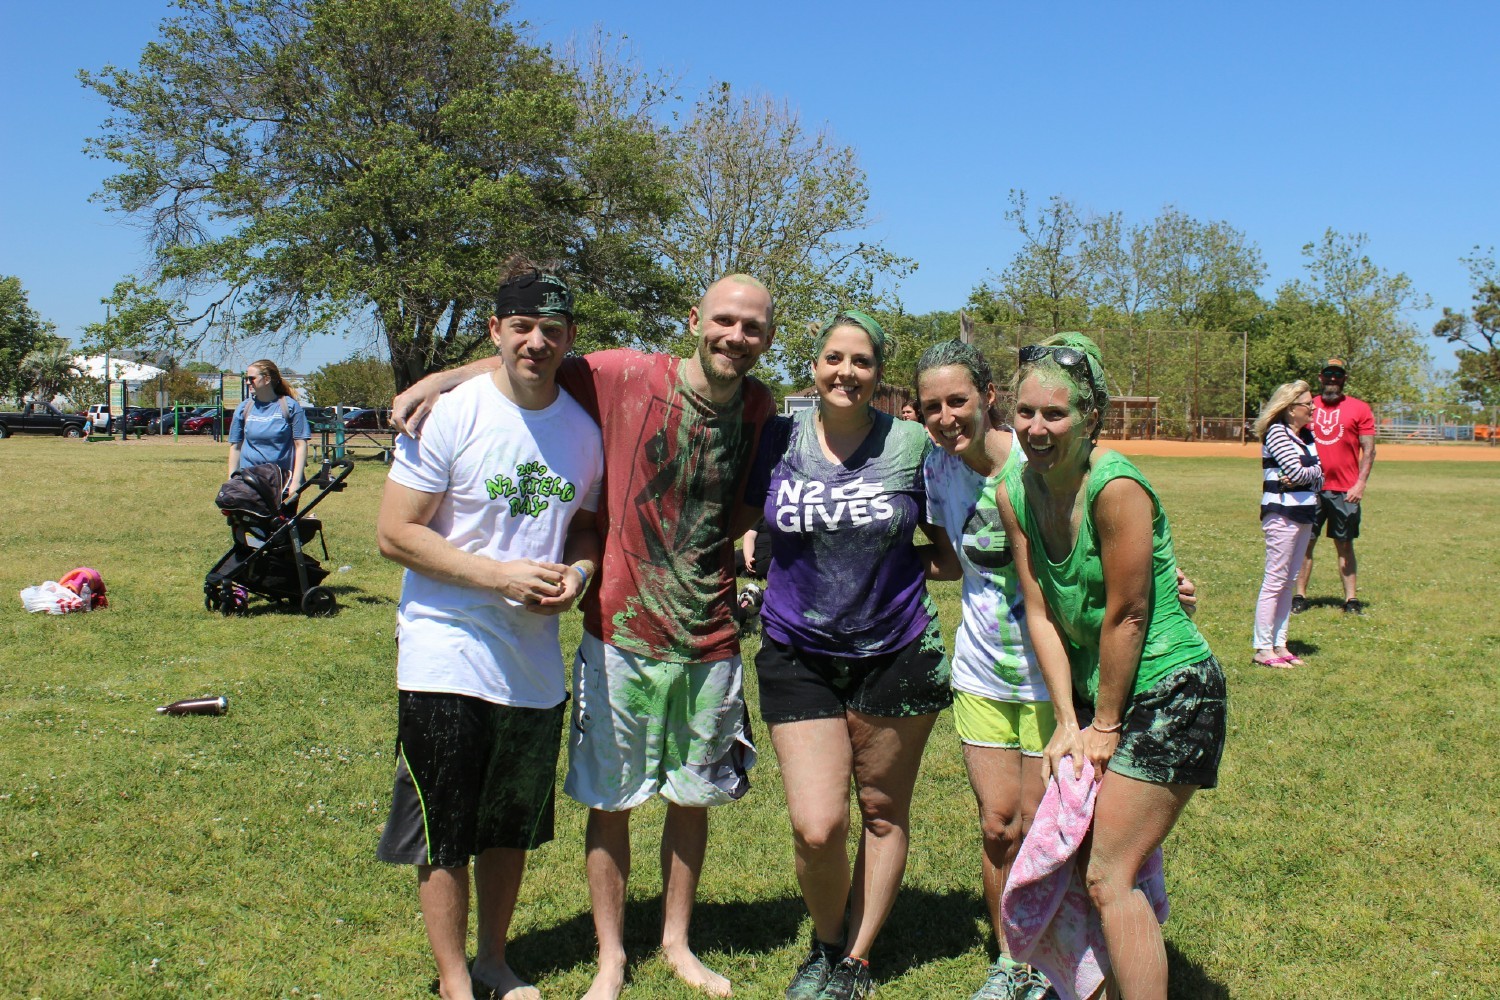 Team members were slimed to raise money for N2GIVES – our philanthropic program fighting human trafficking.